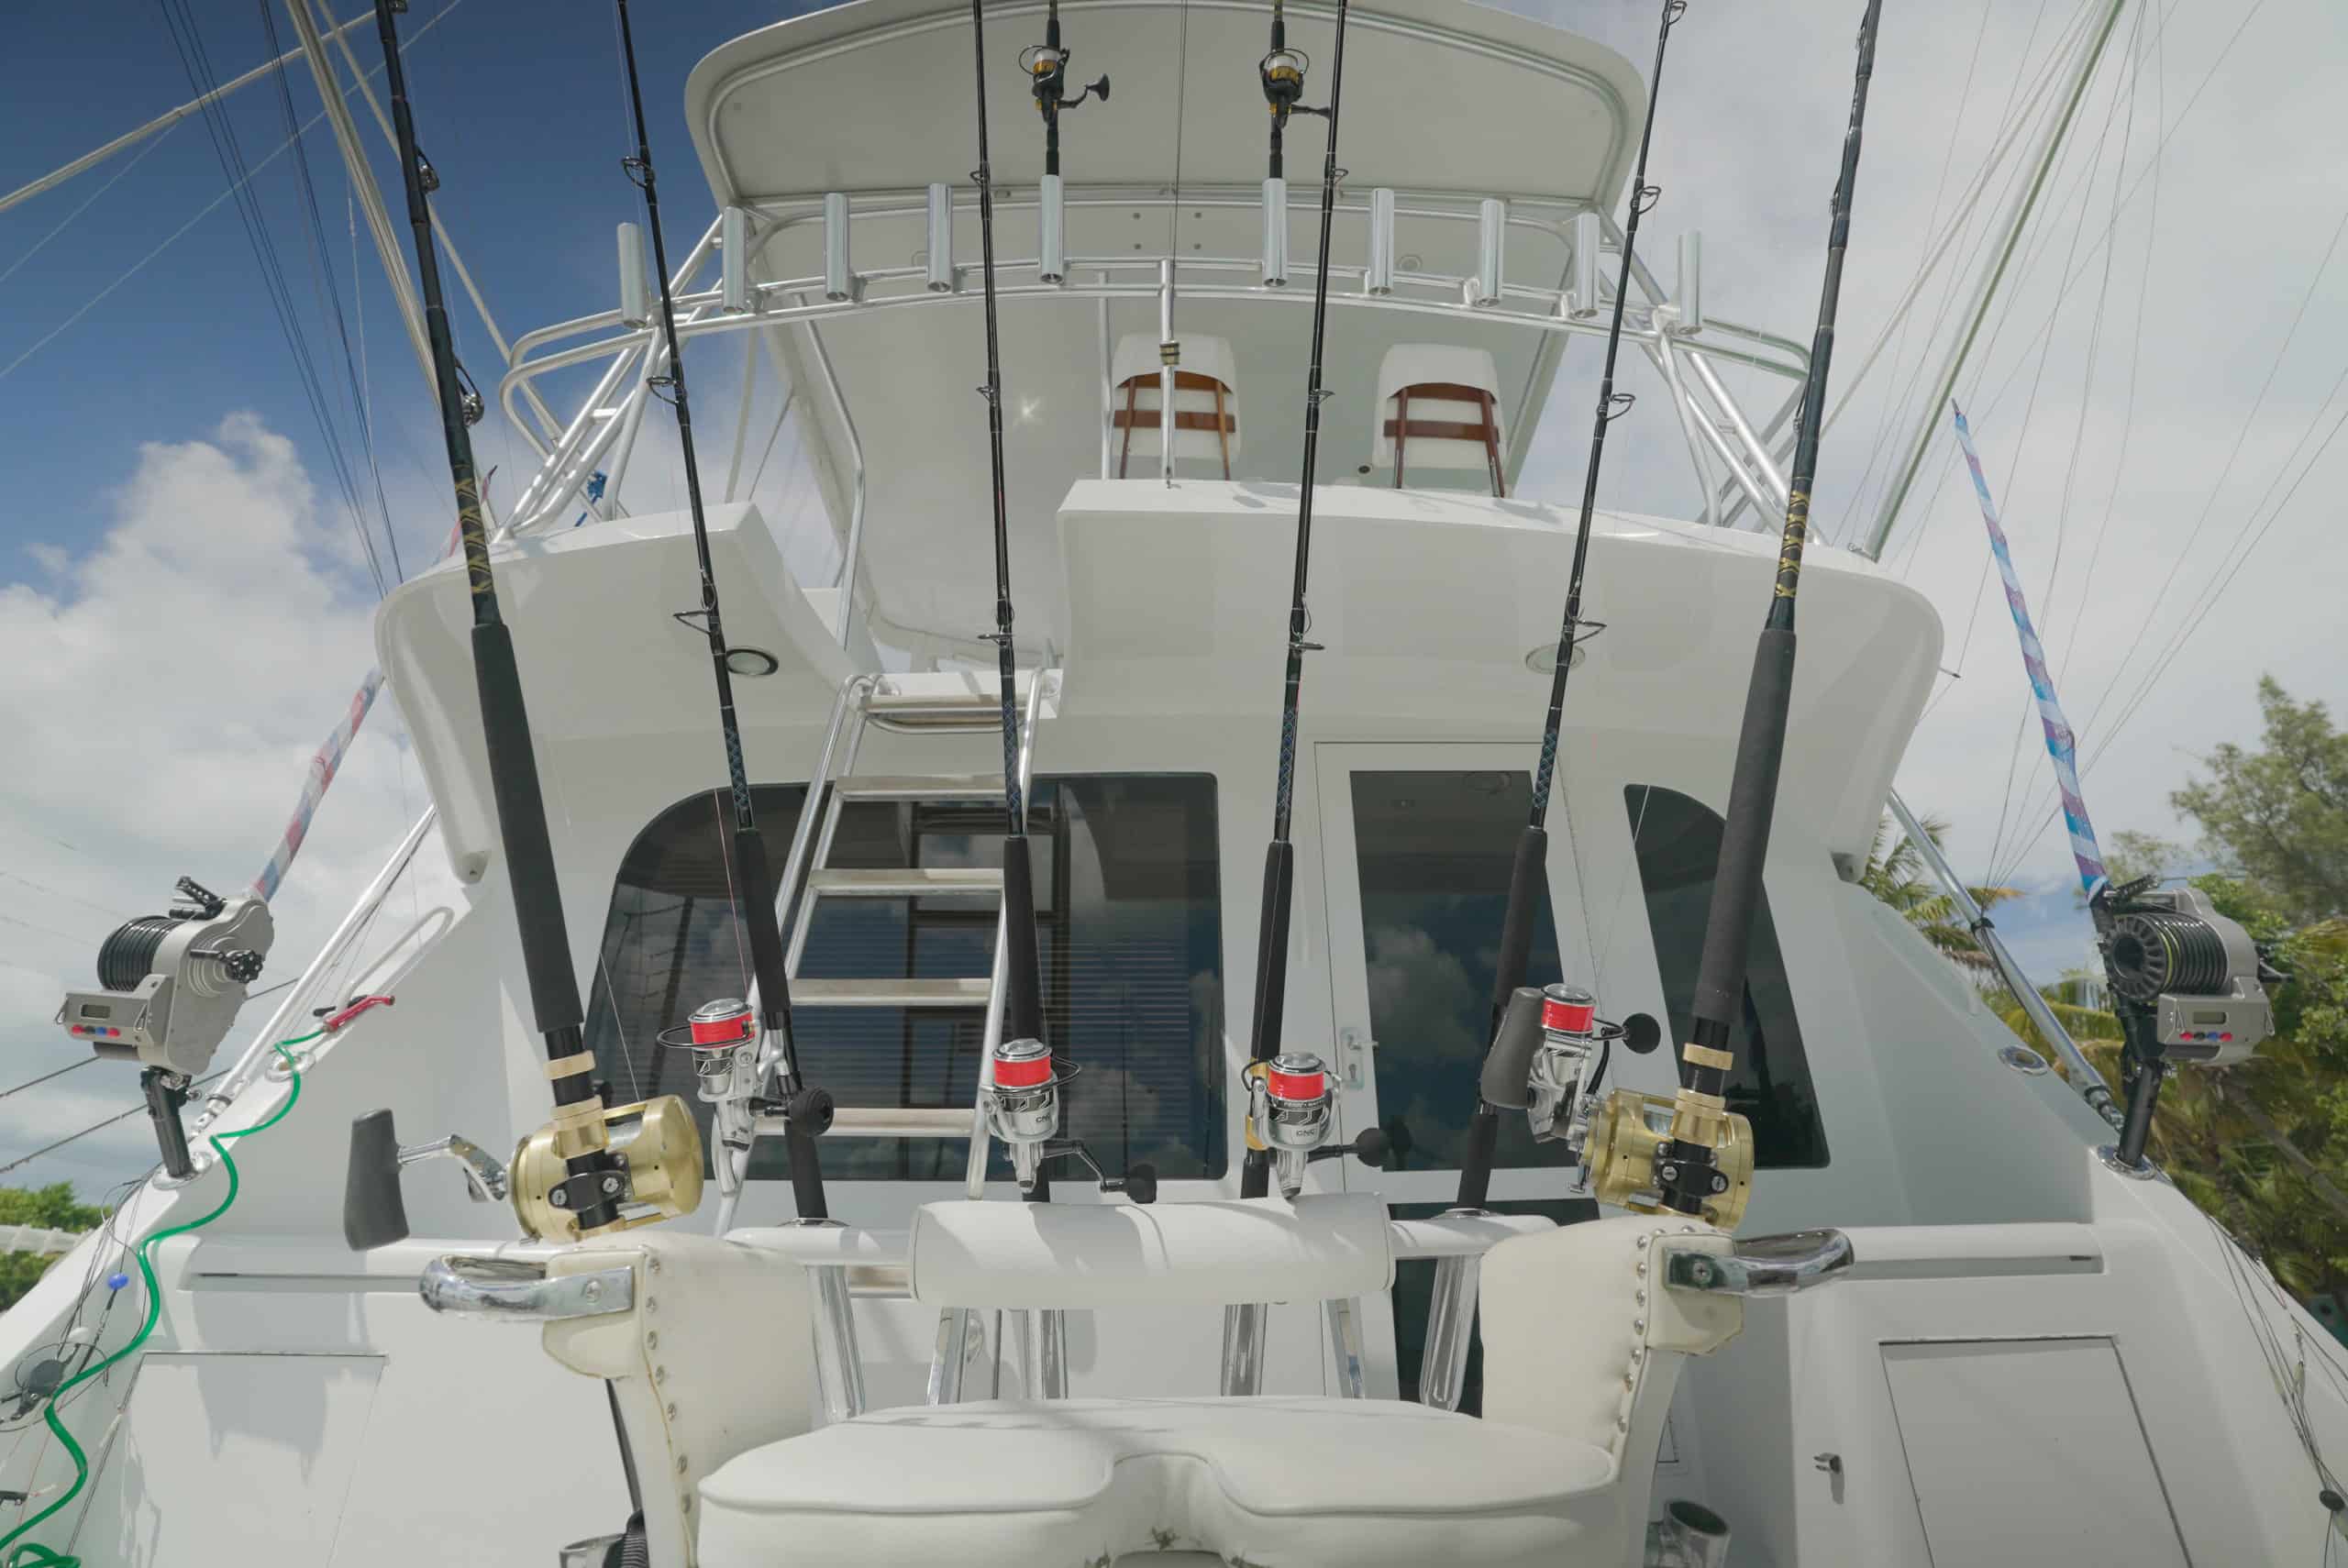 Four Aces Sportfishing and Recreation Yacht